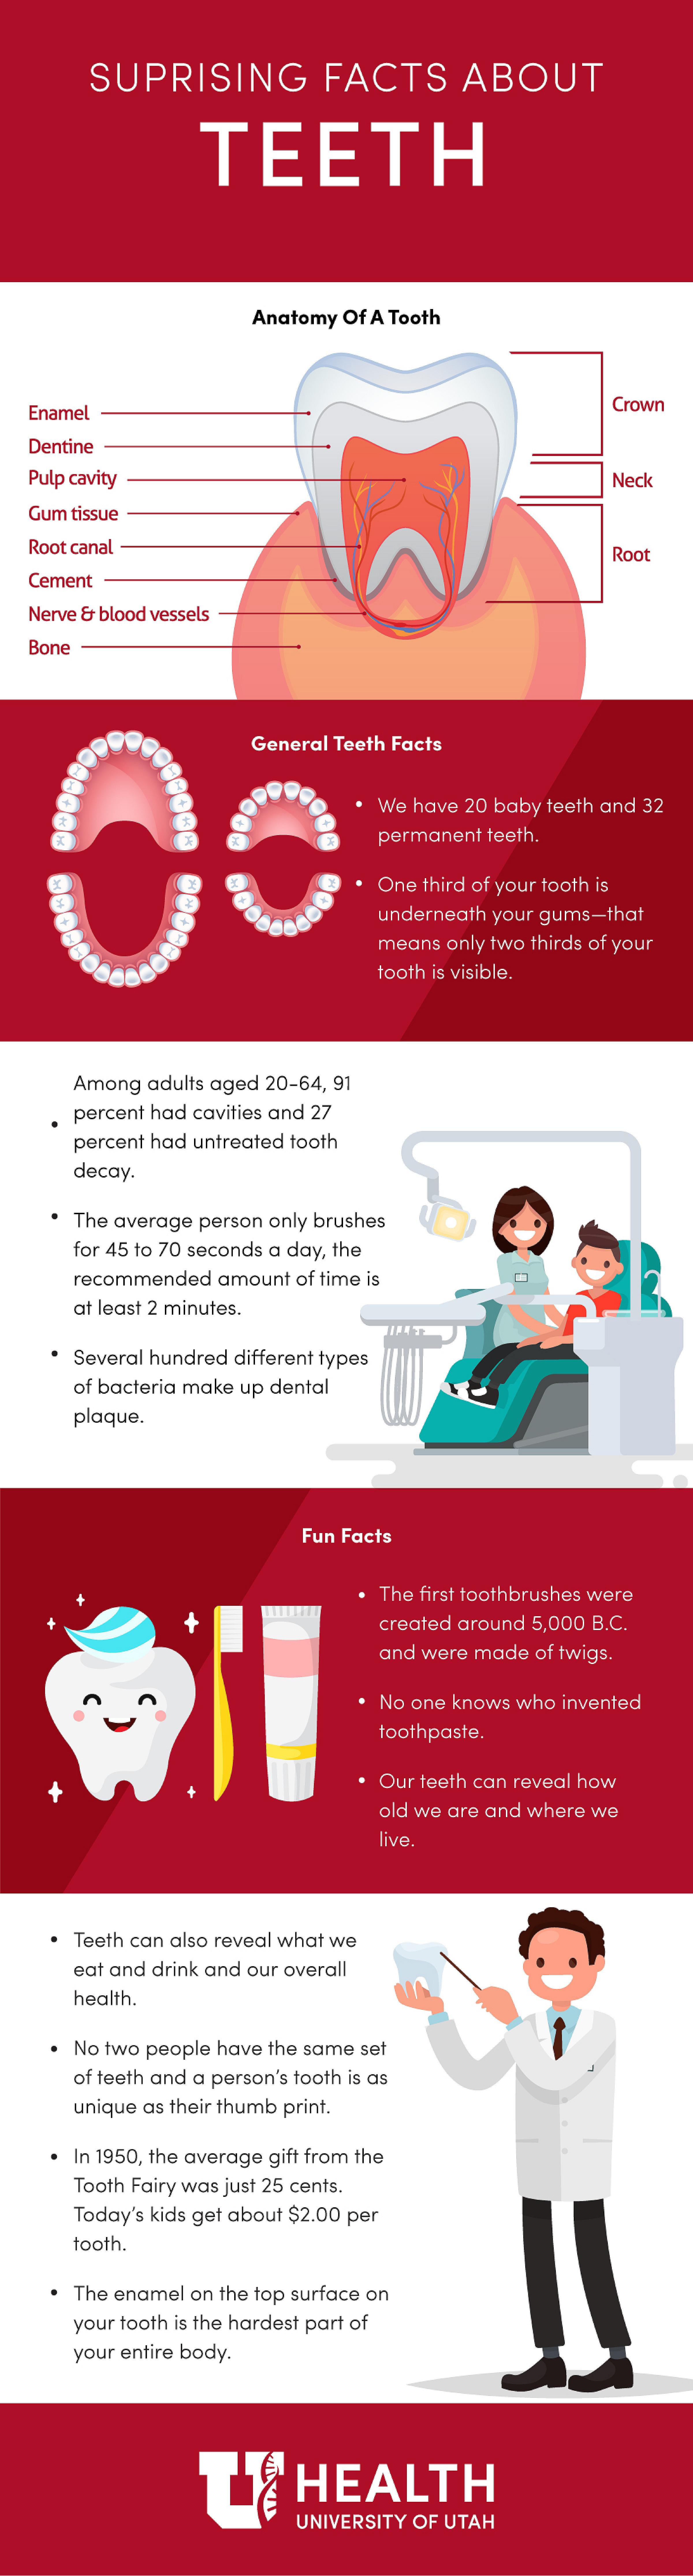 Infographic about teeth